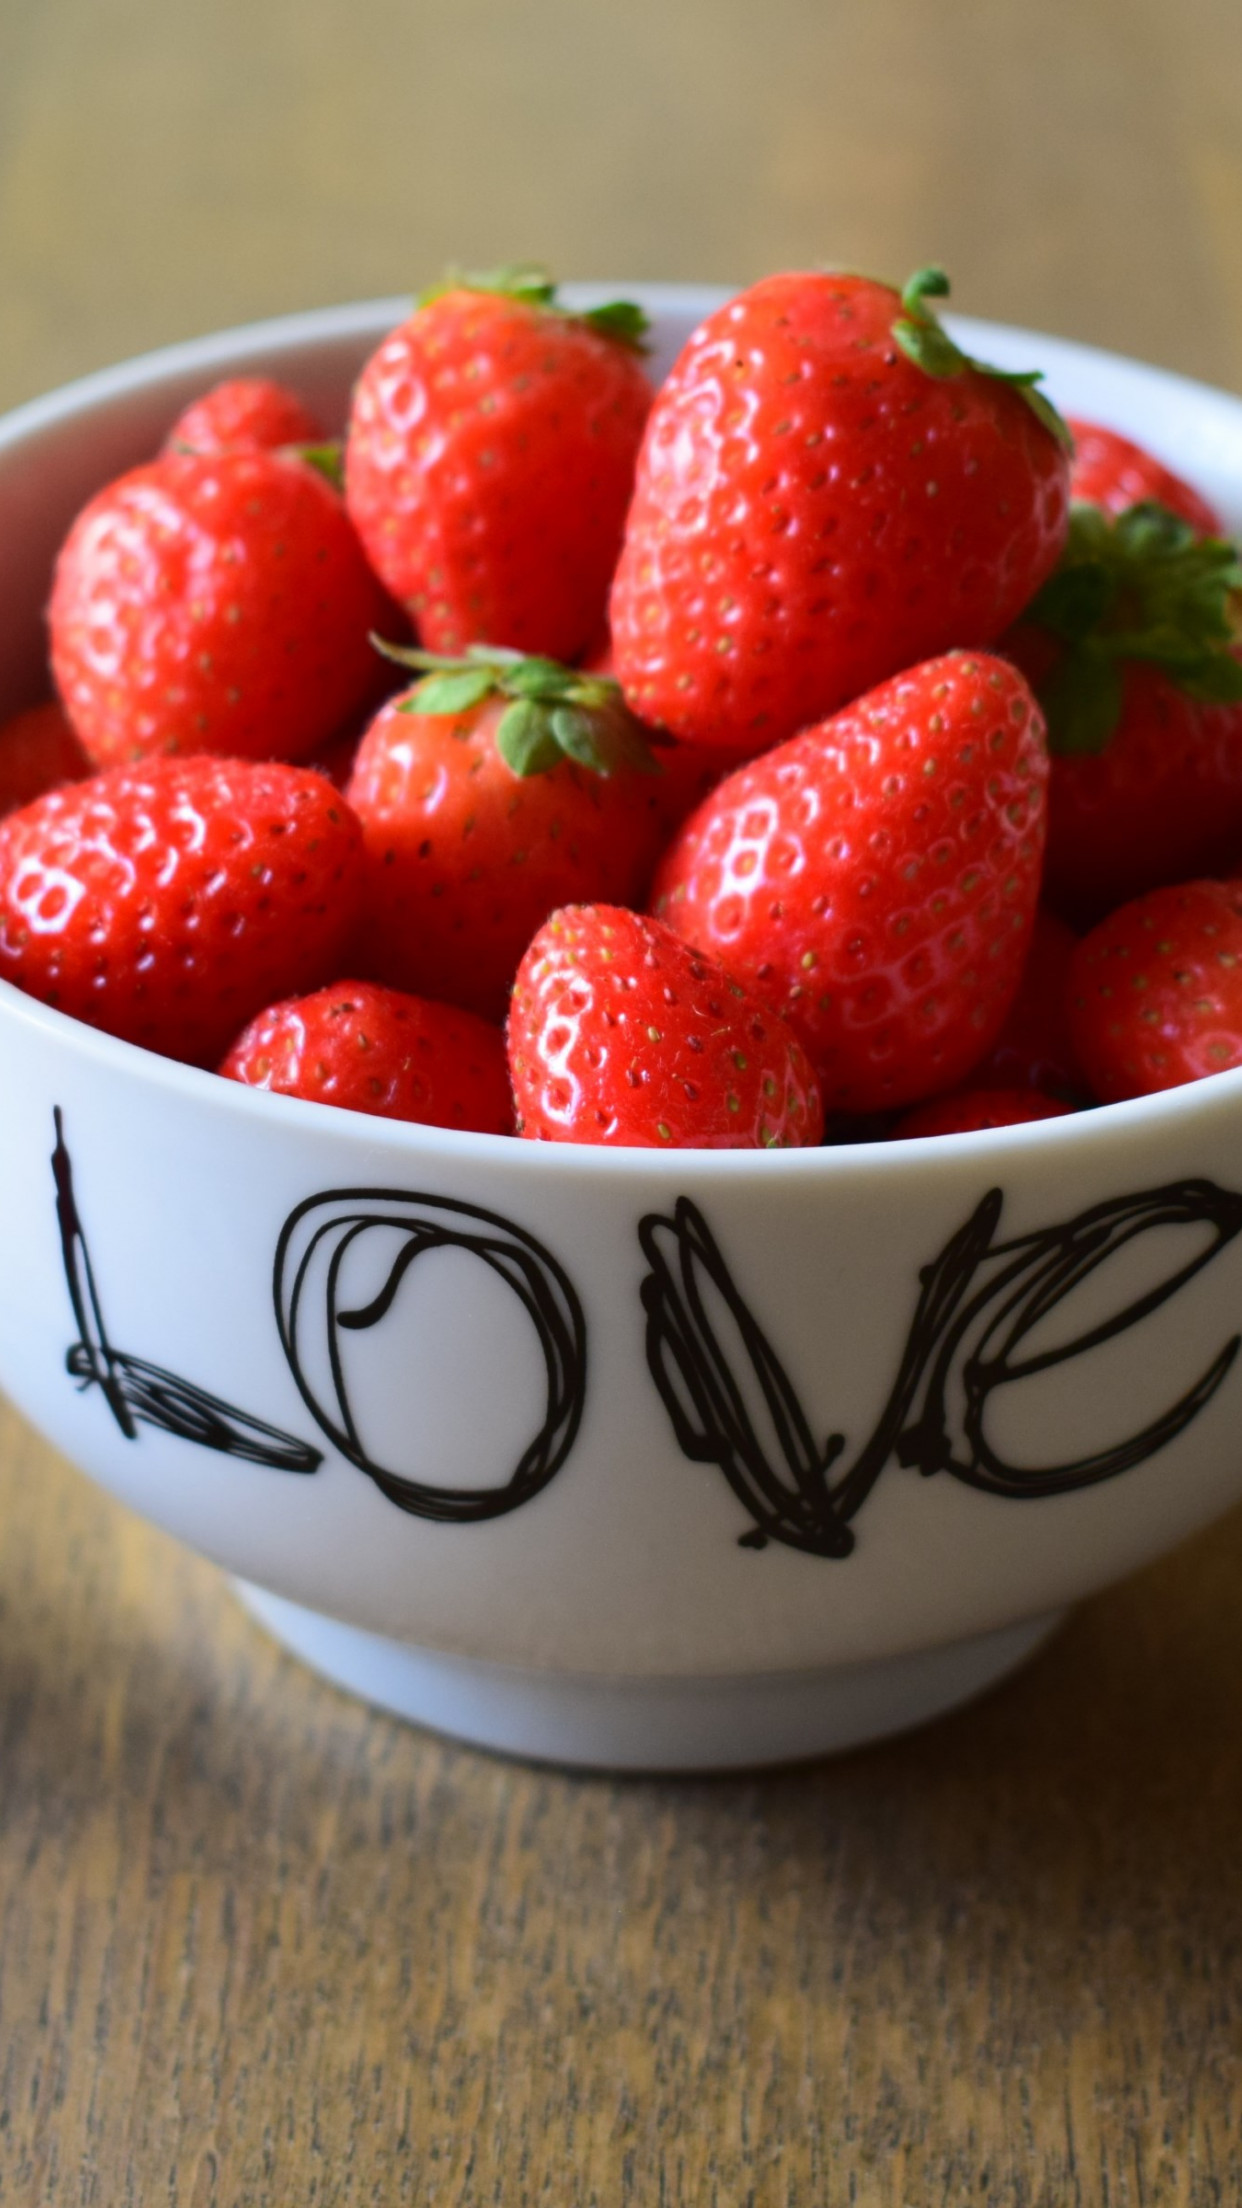 Strawberries with love wallpaper 1242x2208